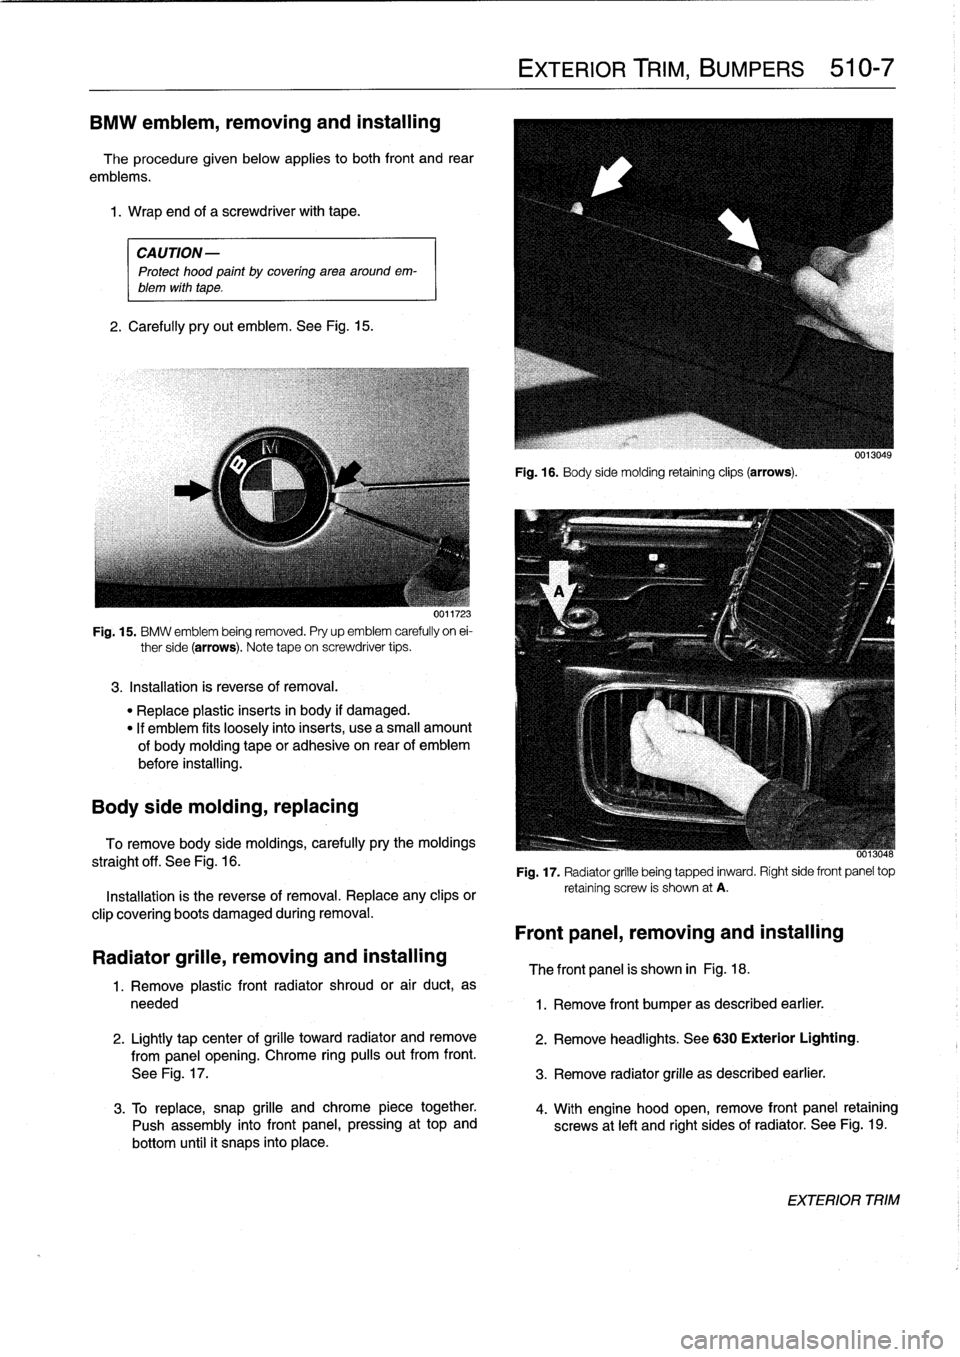 BMW 325i 1998 E36 Workshop Manual 
BMW
emblem,
removing
and
installing

The
procedure
given
below
applies
to
both
front
and
rear

emblems
.

1
.
Wrap
and
of
a
screwdriver
with
tape
.

CAUTION-

Protect
hood
paint
by
coveringarea
aroun